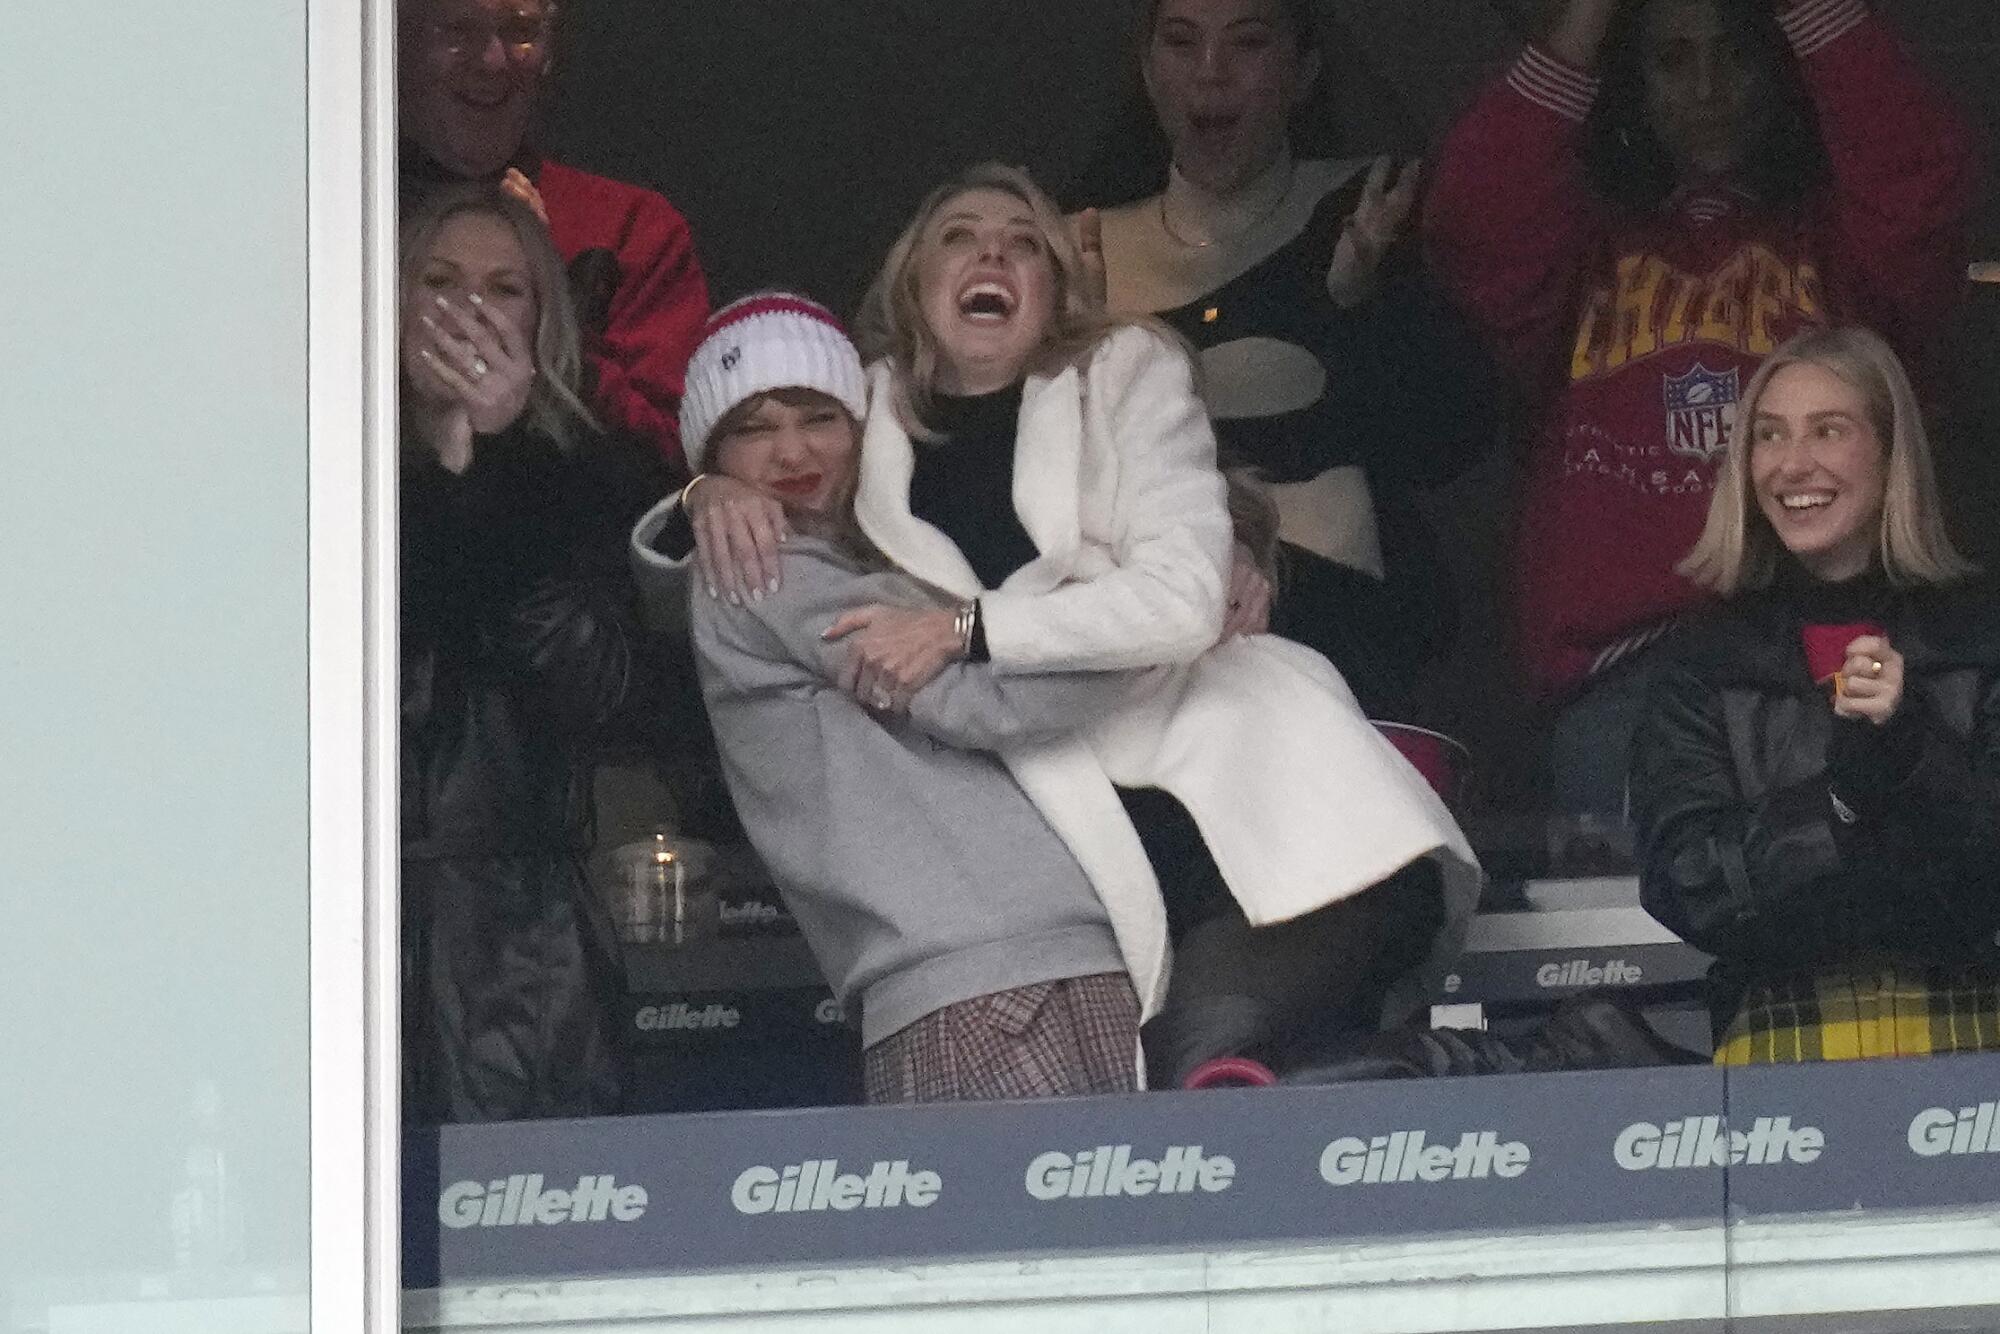 Taylor Swift, Brittany Mahomes, and Ashley Avignone celebrate after the Chief's touchdown against the Patriots in December.